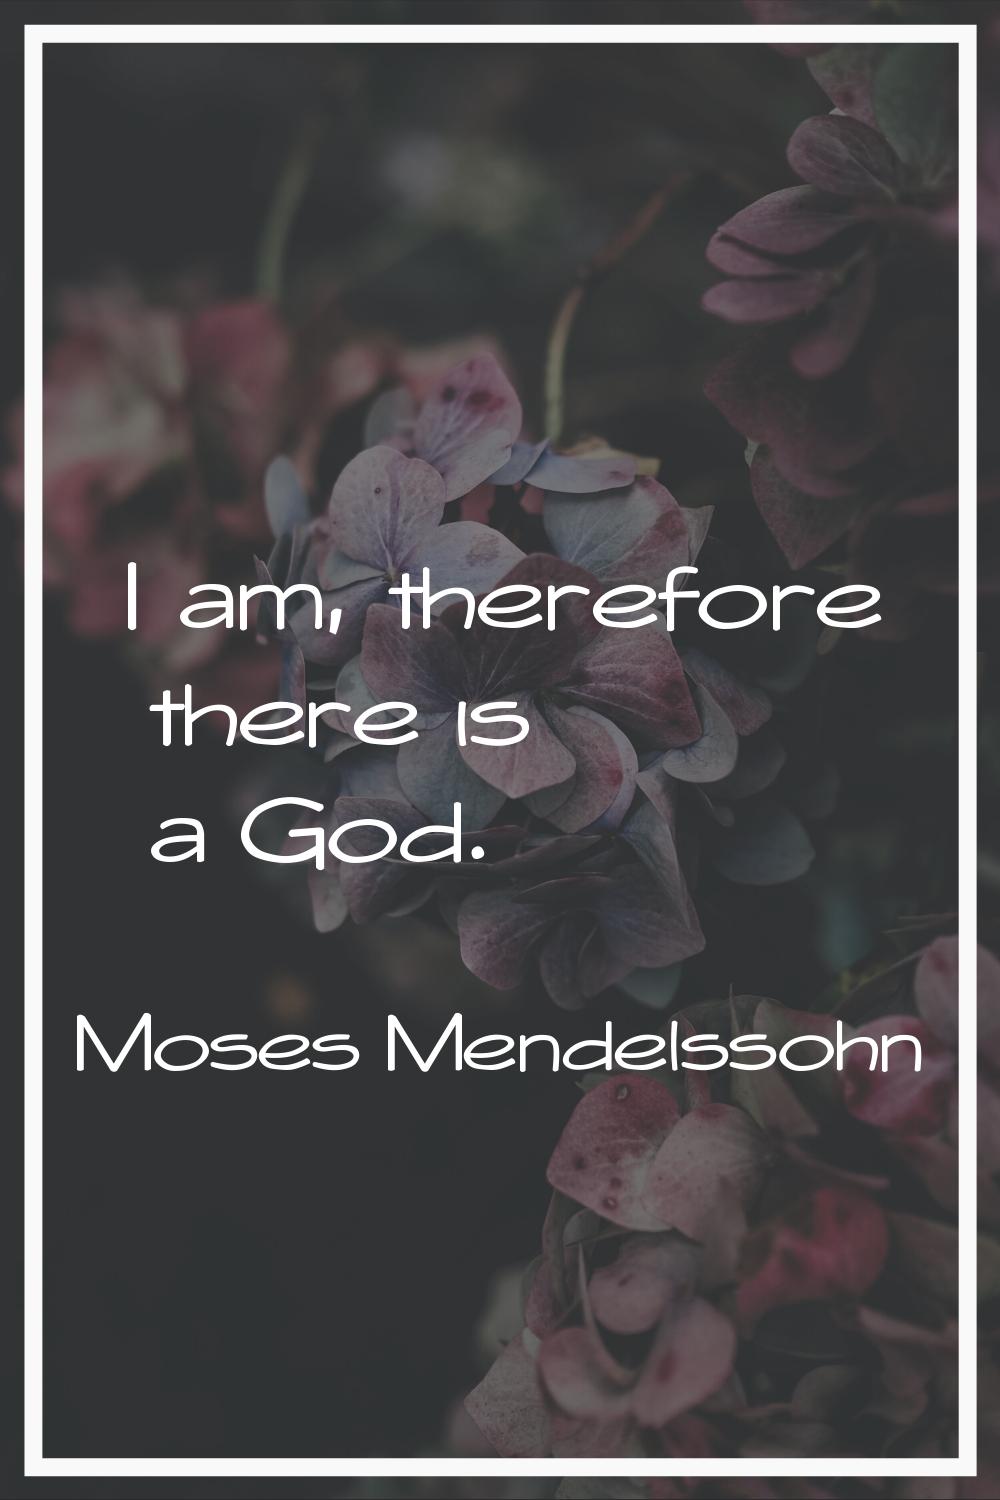 I am, therefore there is a God.